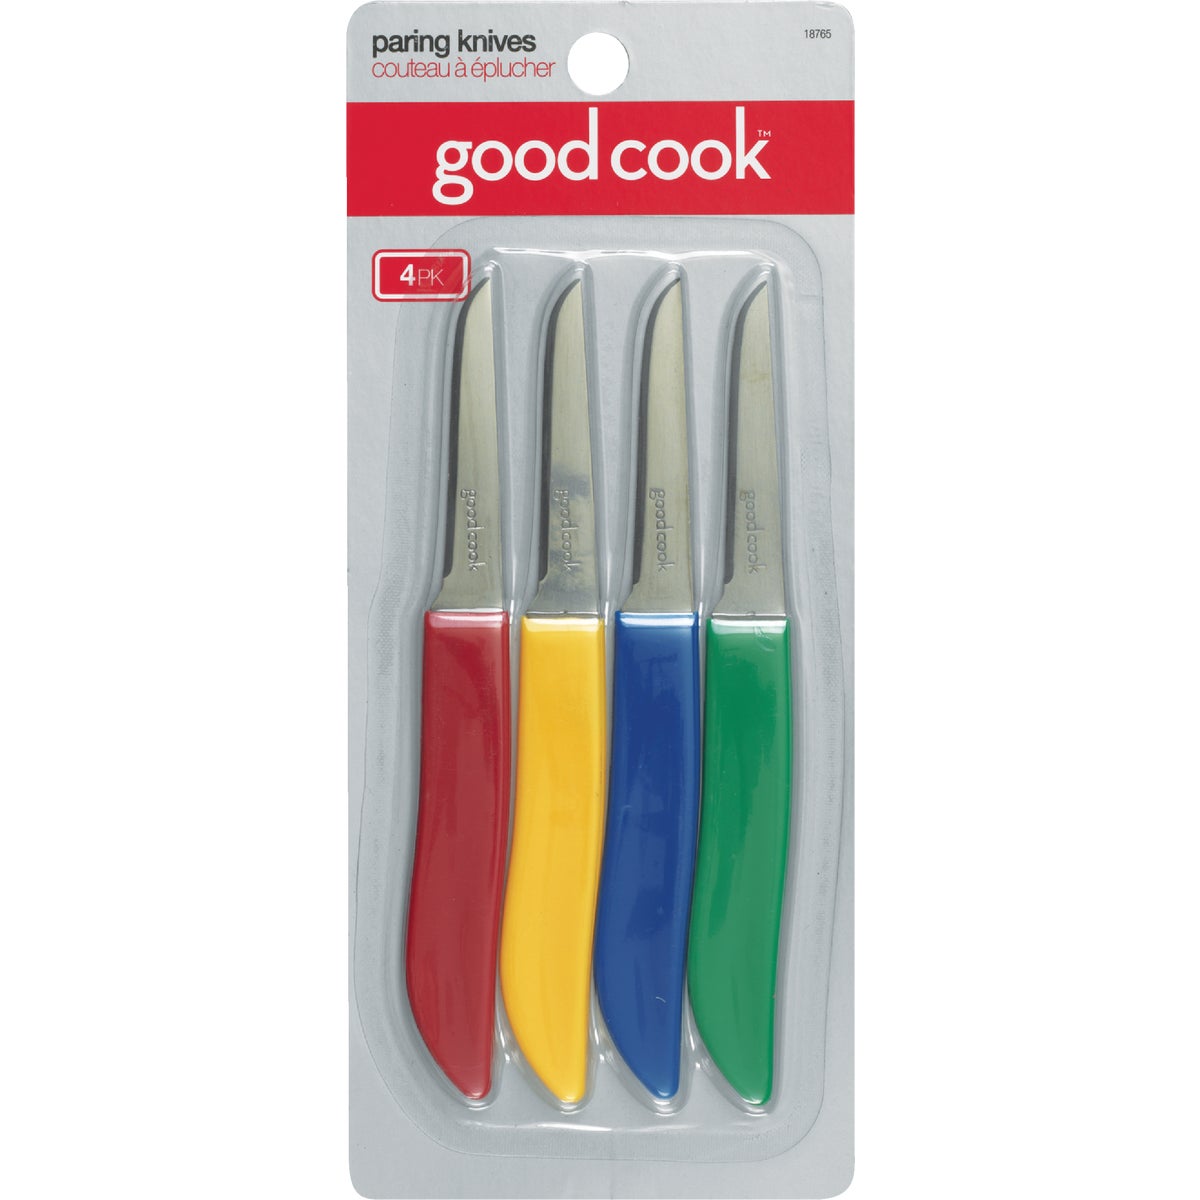 Goodcook Colored Handle Paring Knife Set (4-Piece)